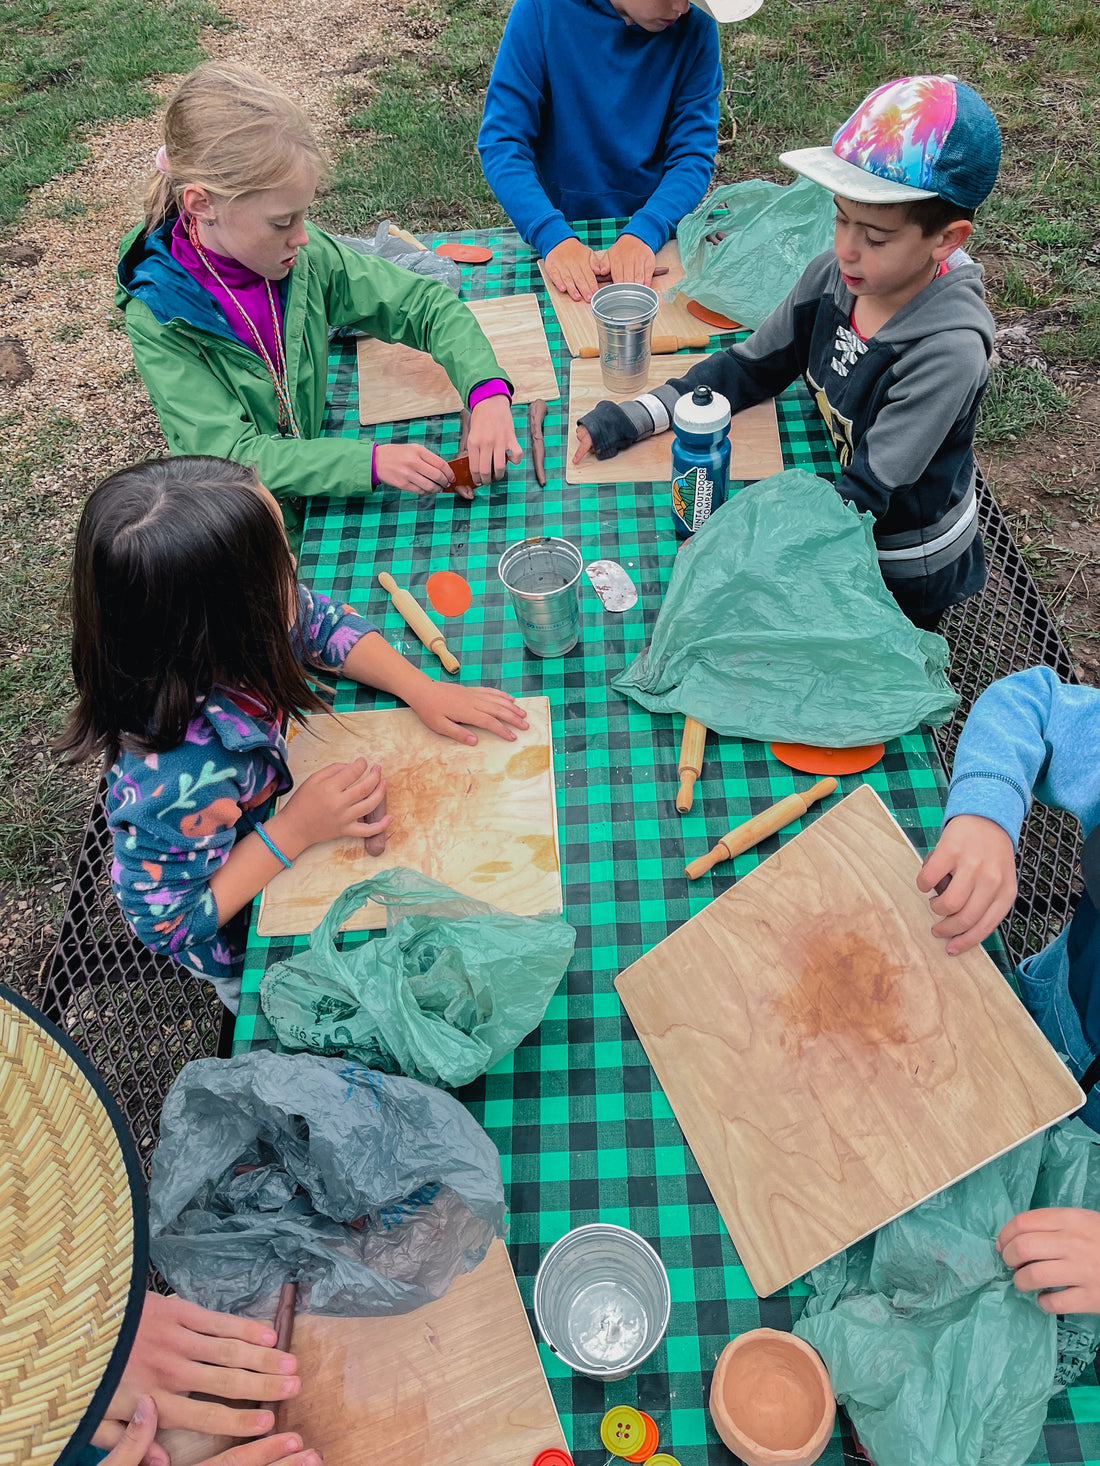 Aerial view of campers working on coil pots at a picnic table in the mountains.